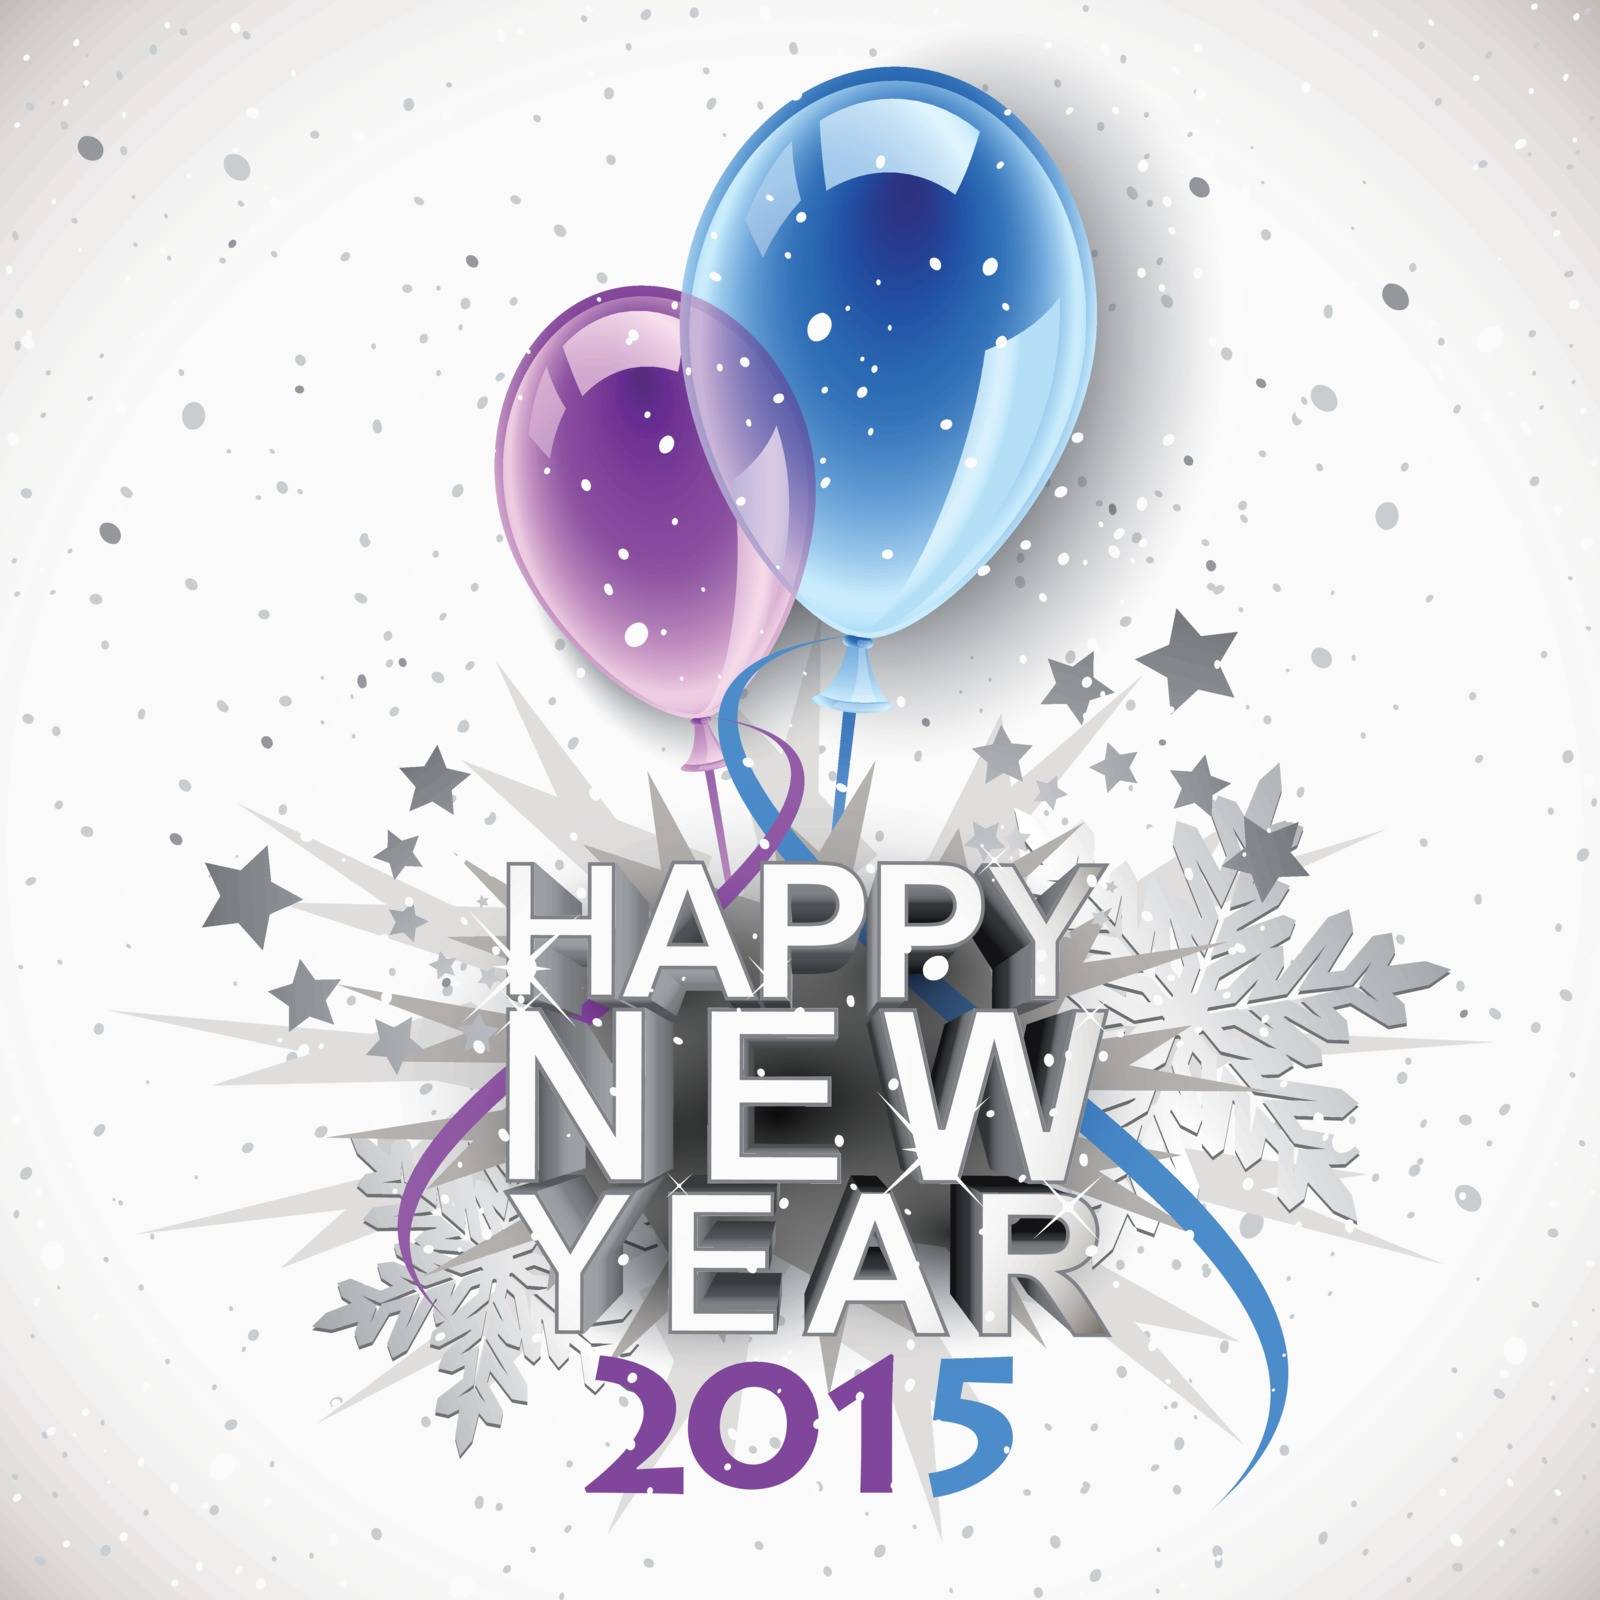 Vintage New Year 2015 by Tilo